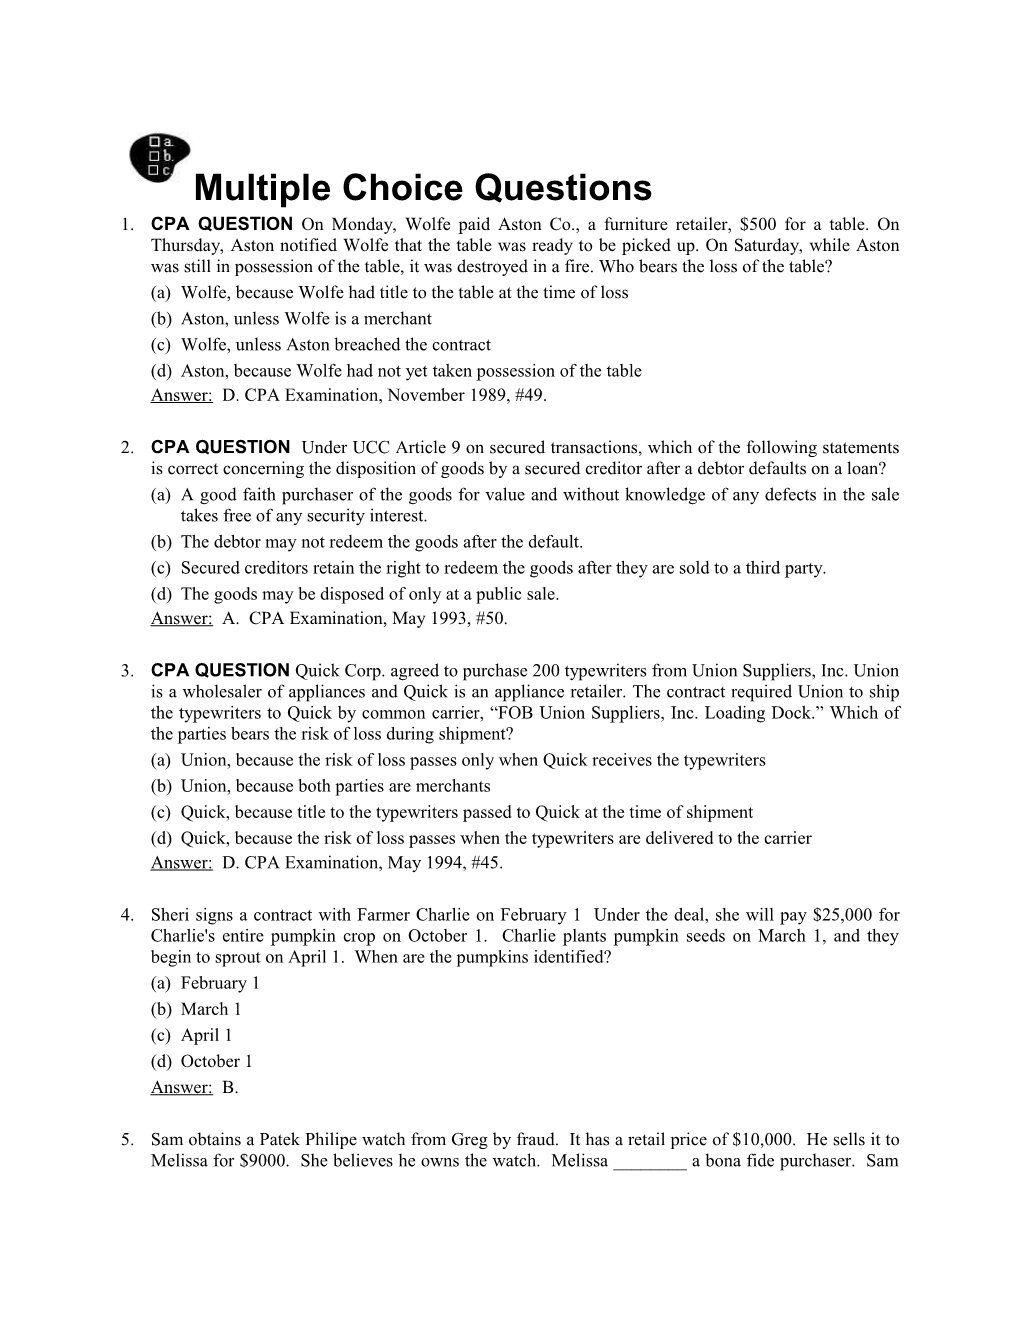 CPA QUESTION:Multiple Choice Questions